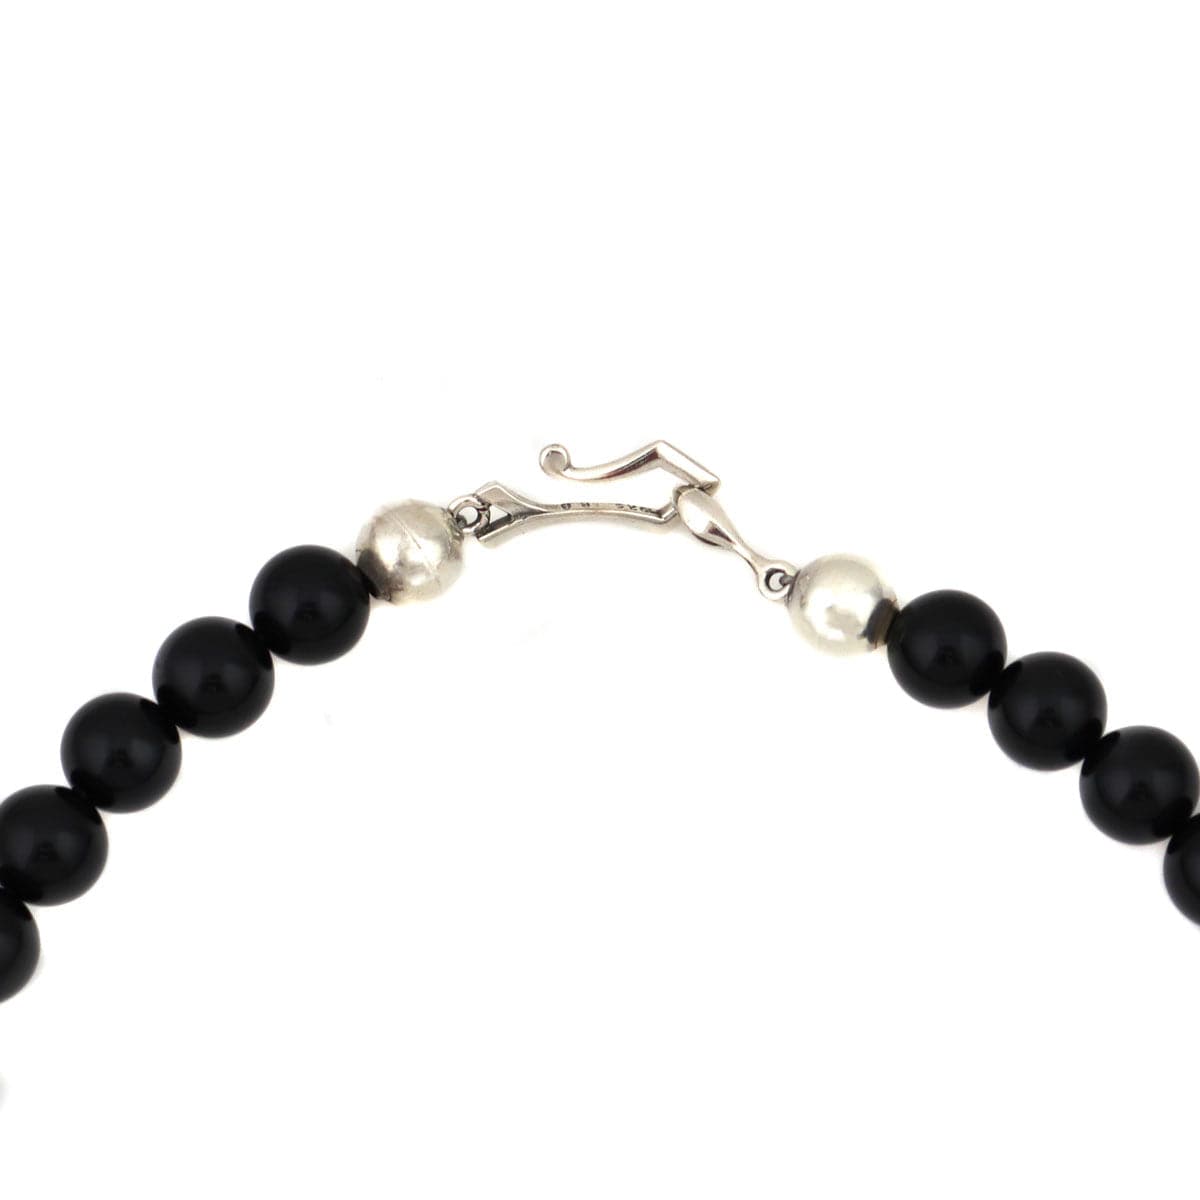 Miramontes - Necklace on Onyx Beads with a Large Silver "Anniversary" Blossom, 16" Length (J91305-1221-021)2